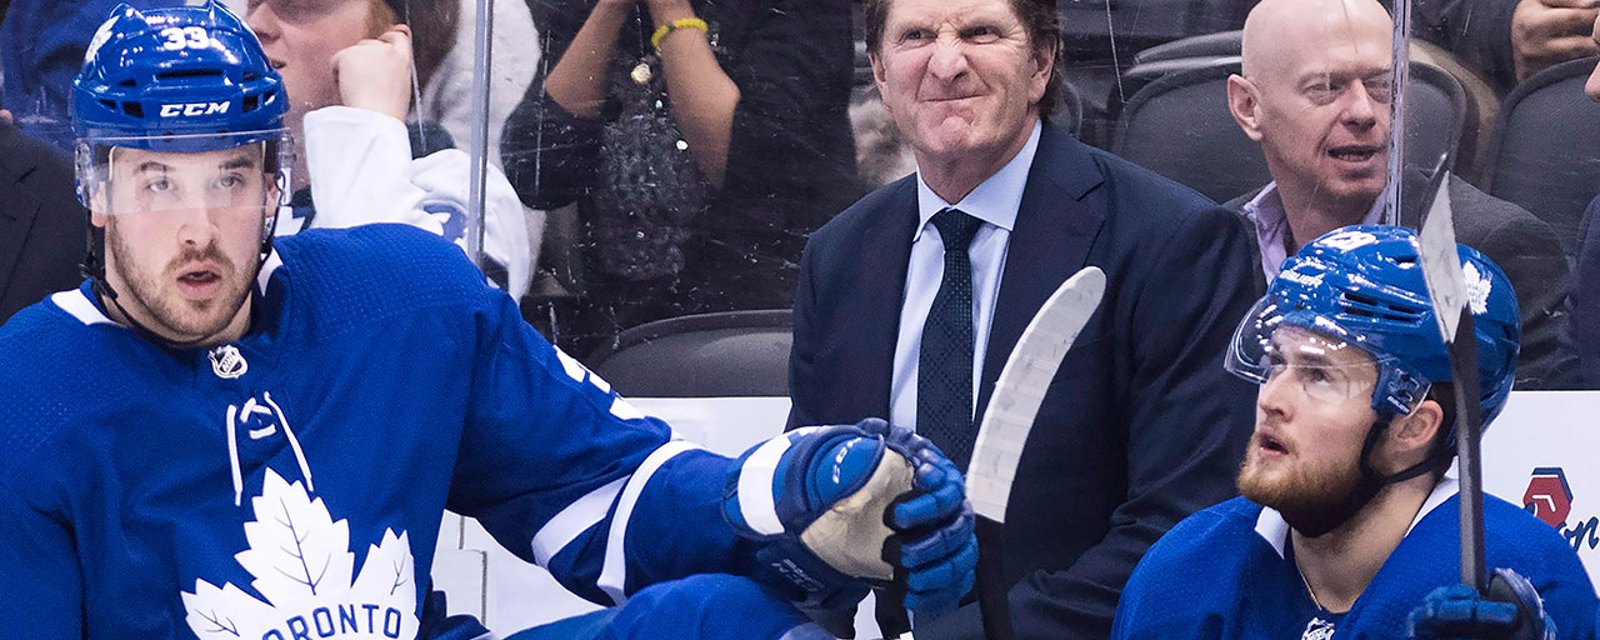 Mike Babcock met with NHL’s officiating supervisor ahead of Game 1 